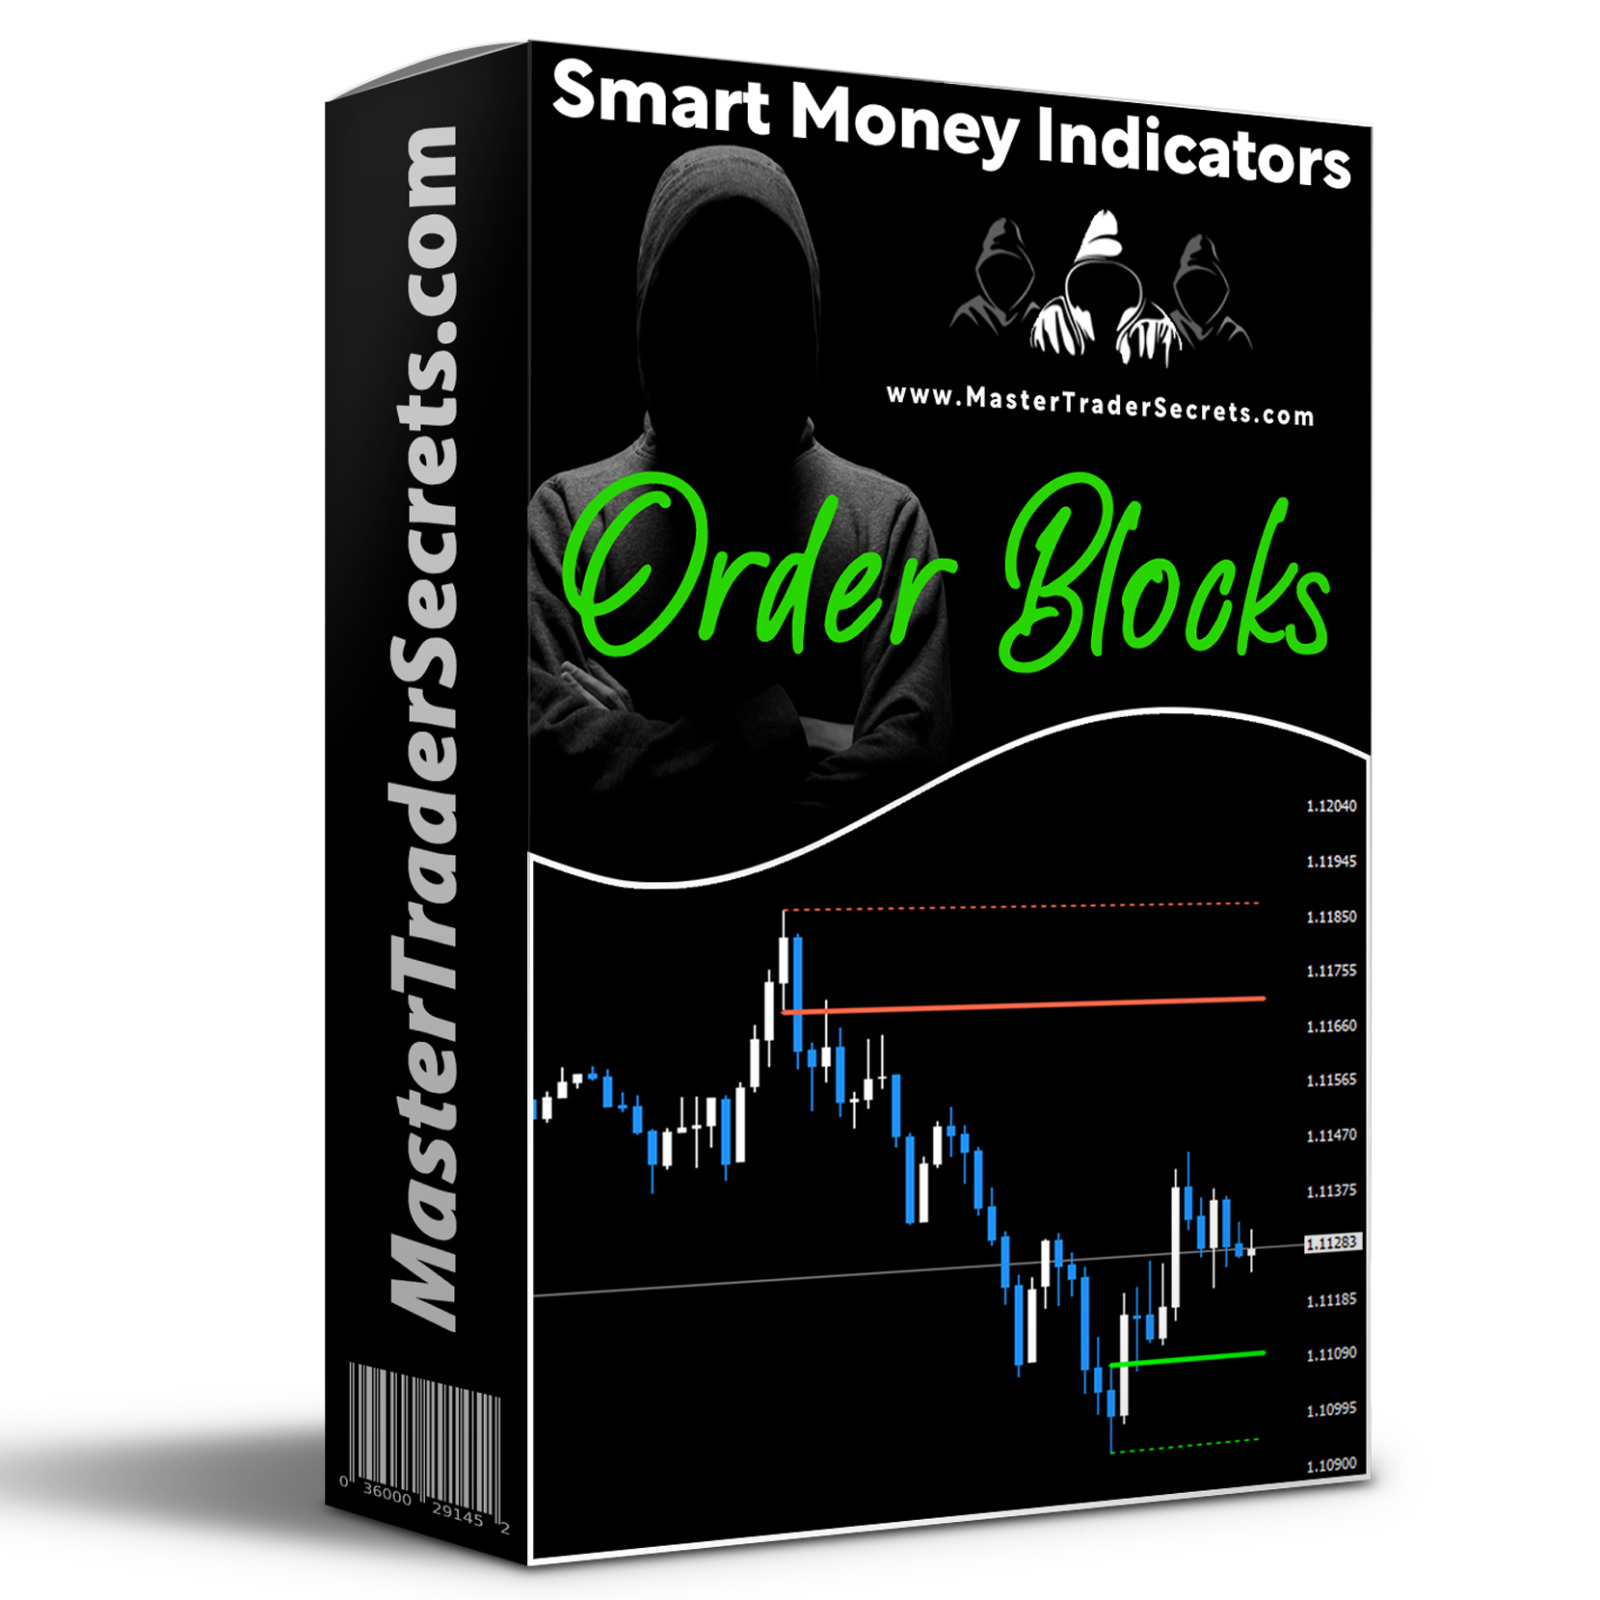 Order blocks are ‘smart money’ footprints in the charts. Best Forex strategy